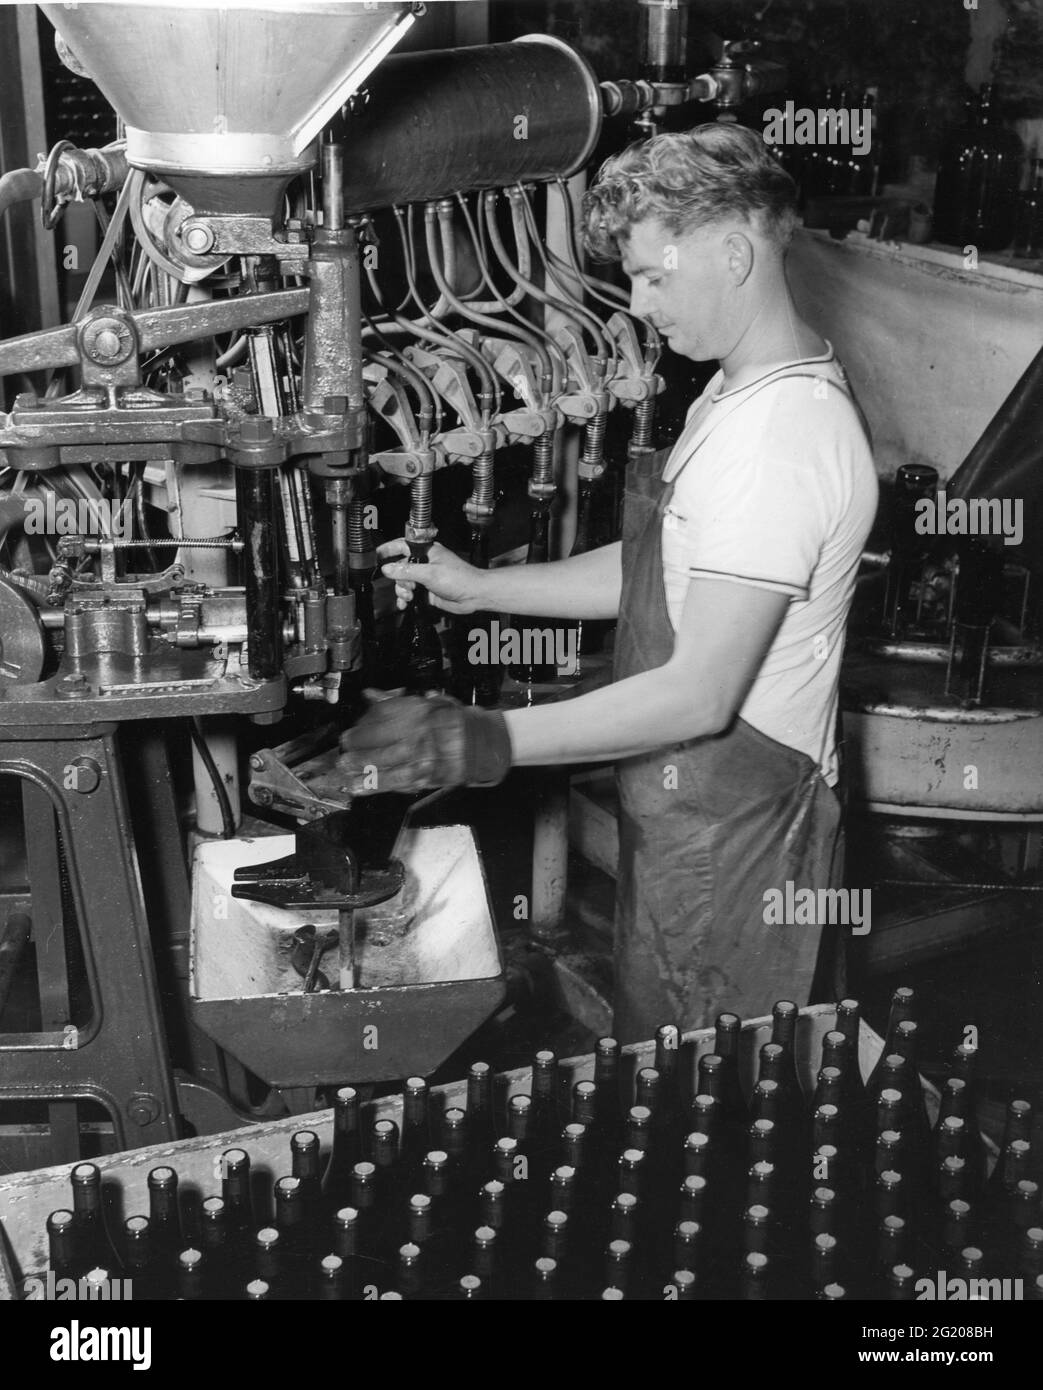 Worker in Beringer Brothers winery takes bottles from the sterlizer behind him and puts them in the bottling machine at right. When they are filled with wine, he puts them in the corking machine and sets them in a box, St Helena, CA, 1961. (Photo by Beringer Brothers, Inc/RBM Vintage Images) Stock Photo